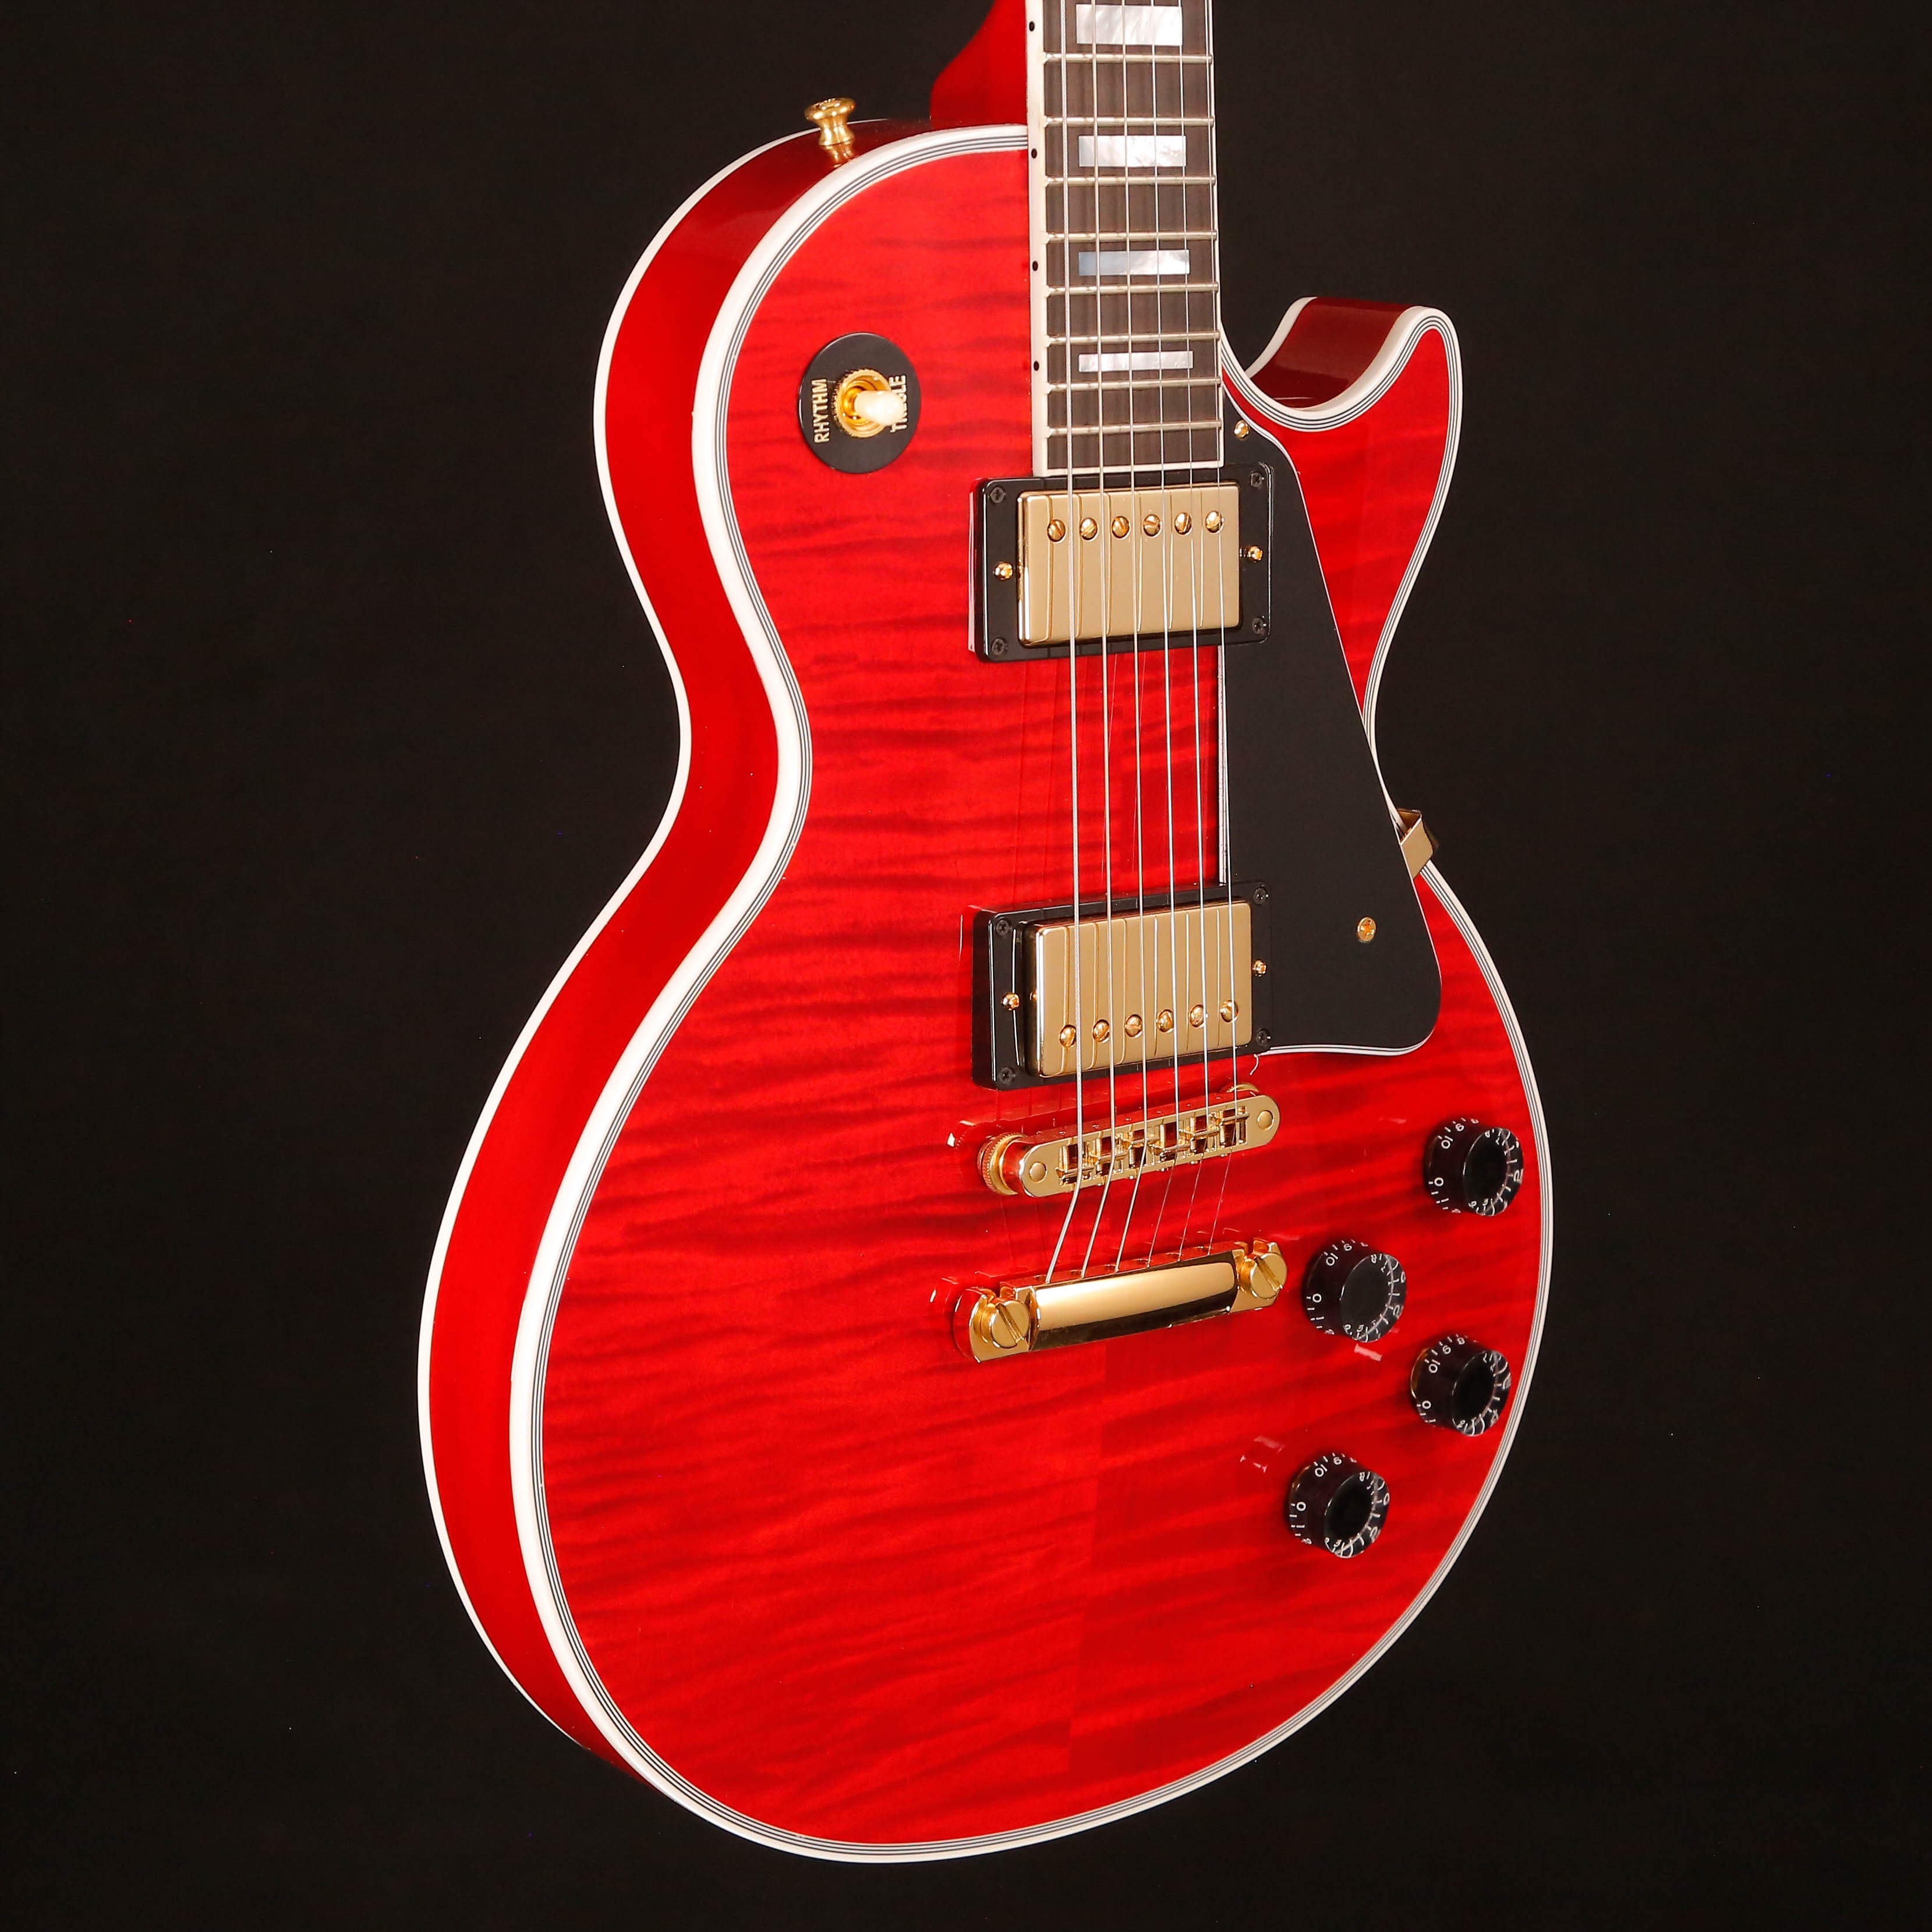 Gibson Les Paul Custom Figured, HAND SELECTED TOP Transparent Red Flame